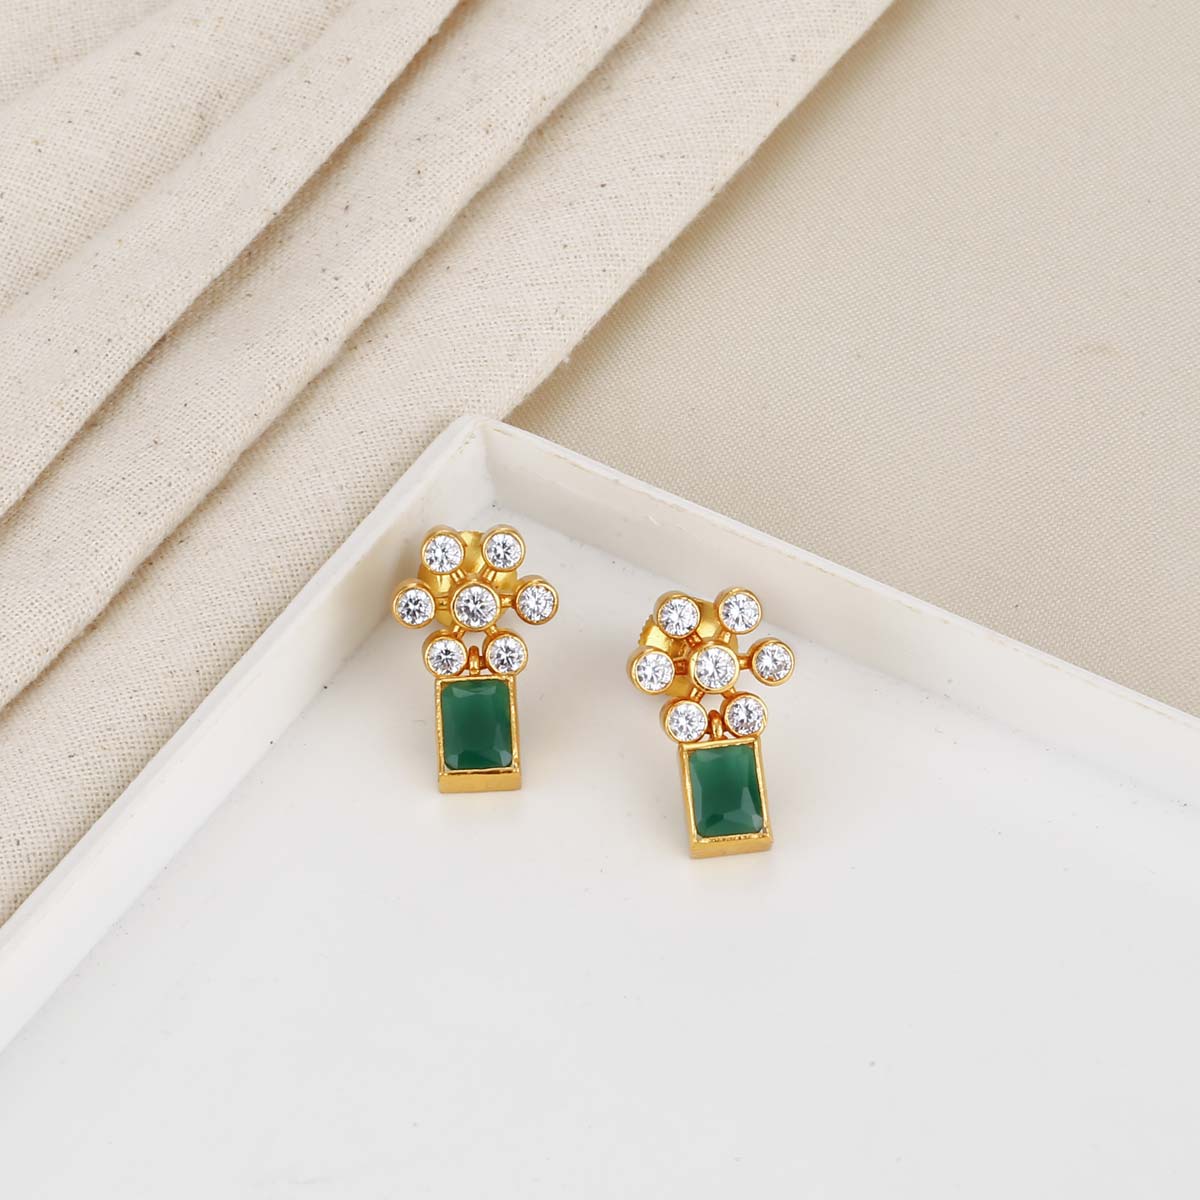 18k Gold Plated Green Stone Pearl Dangle Earrings at 1740.00 INR in Pune |  Palmonas Fashion Private Limited